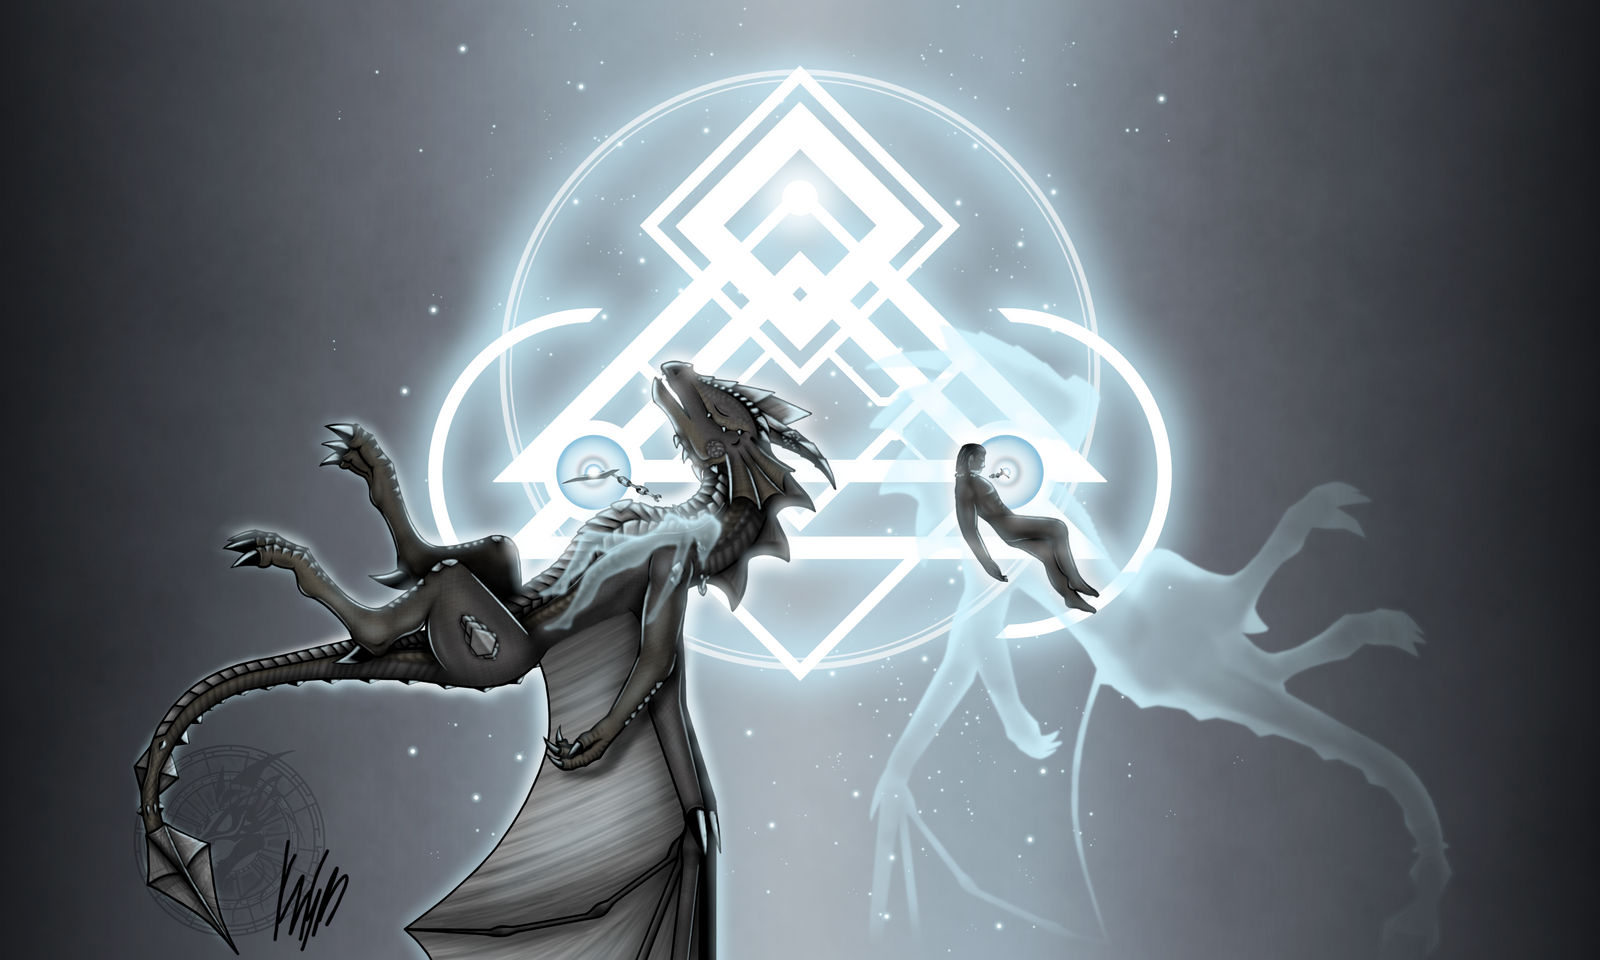 soulbound_by_spitzkopf2312_ddw23x9-fullview.png